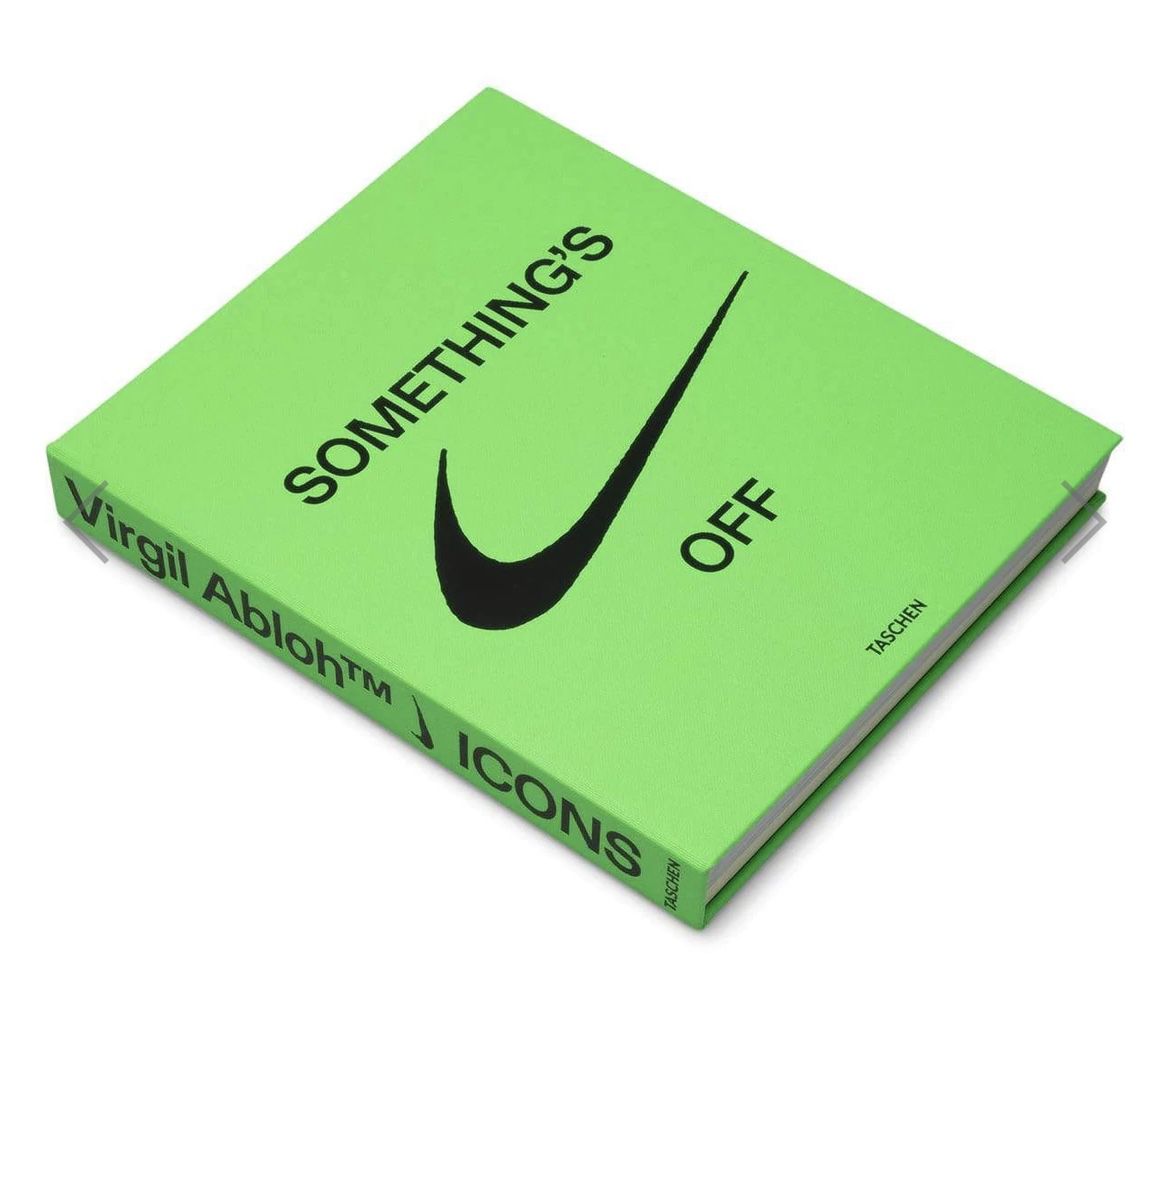 VIRGIL ABLOH. NIKE. ICONS BOOK for Sale in Cypress, TX - OfferUp